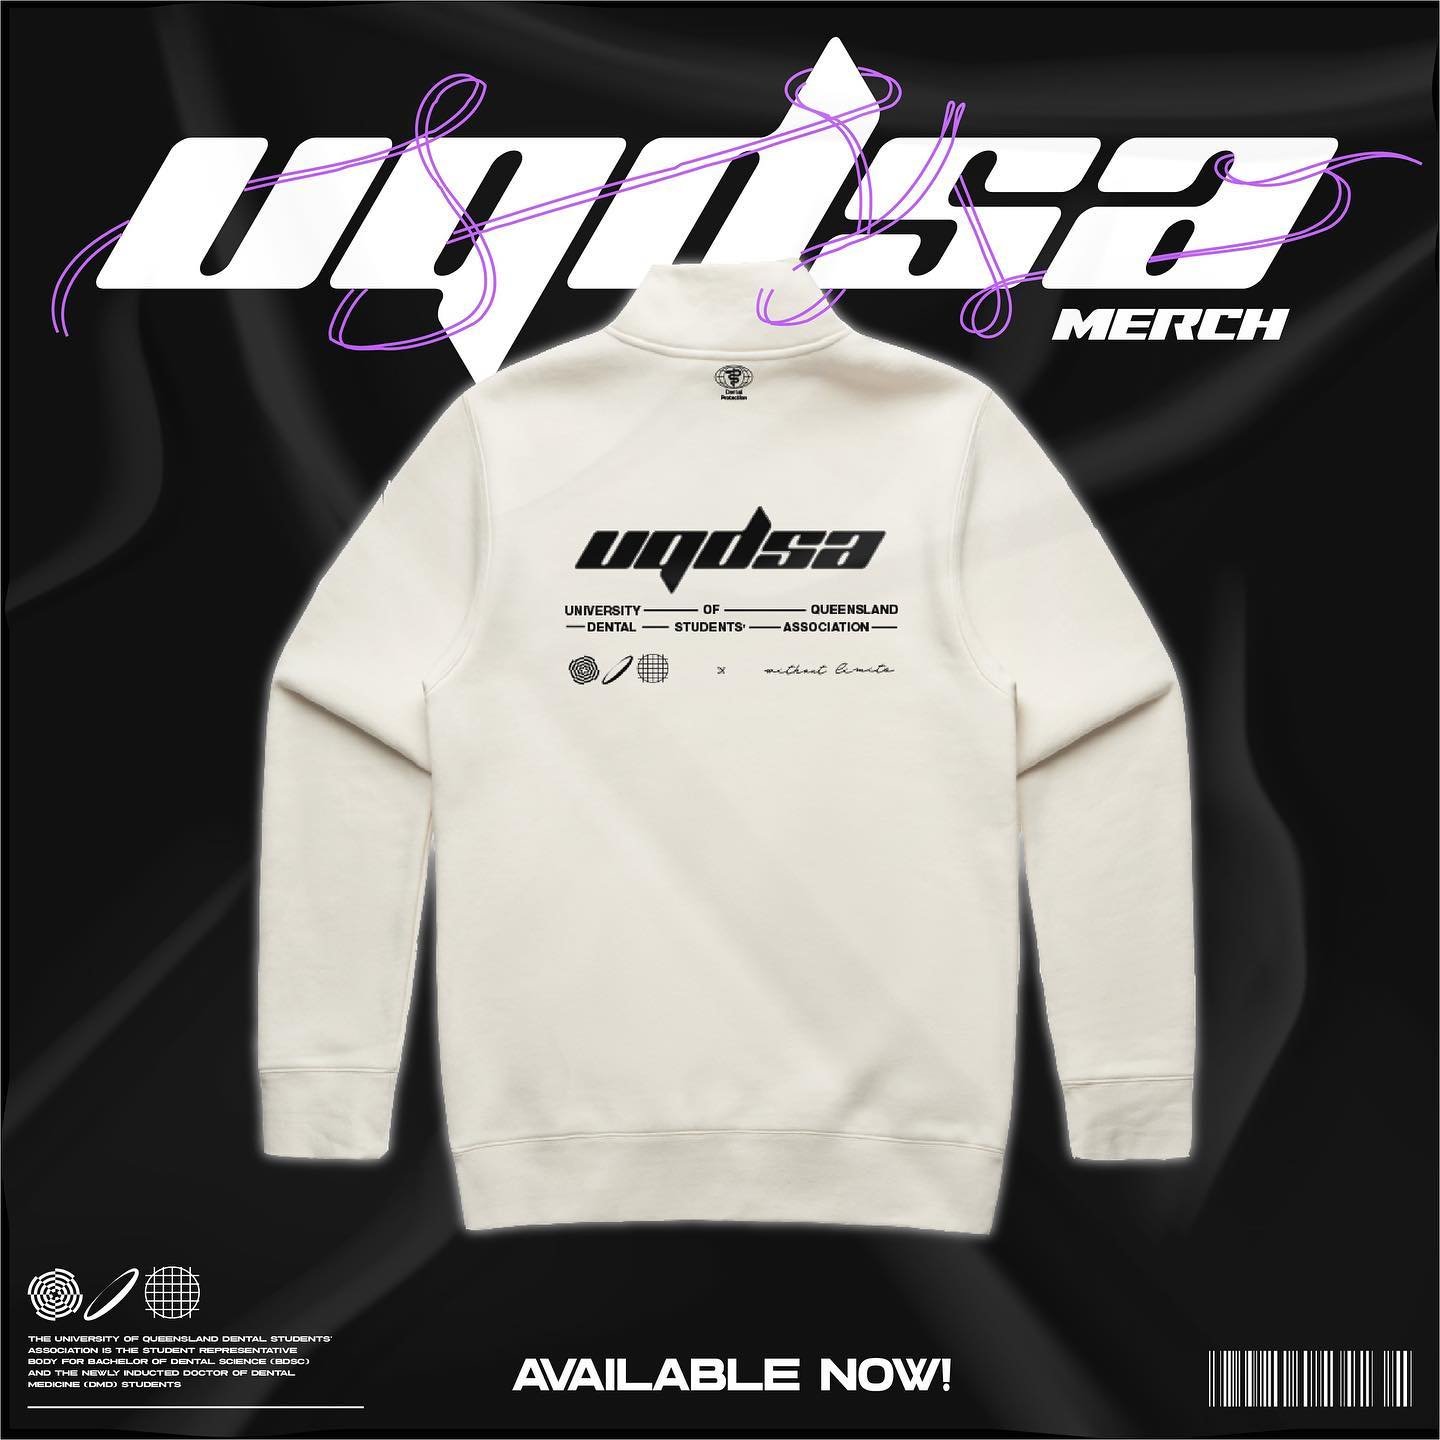 2024 UQDSA MERCH SALES ARE NOW OPEN!!🔥😍

We have T-SHIRTS, QUARTER ZIPS and TOTE BAGS in coolest colours🥶AND we have the hottest deals EVER🔥🔥 so you can get more and save more!💸

⭐️$30 UQDSA T-shirt (white, black, ecru, cypress)
⭐️$60 UQDSA Qua